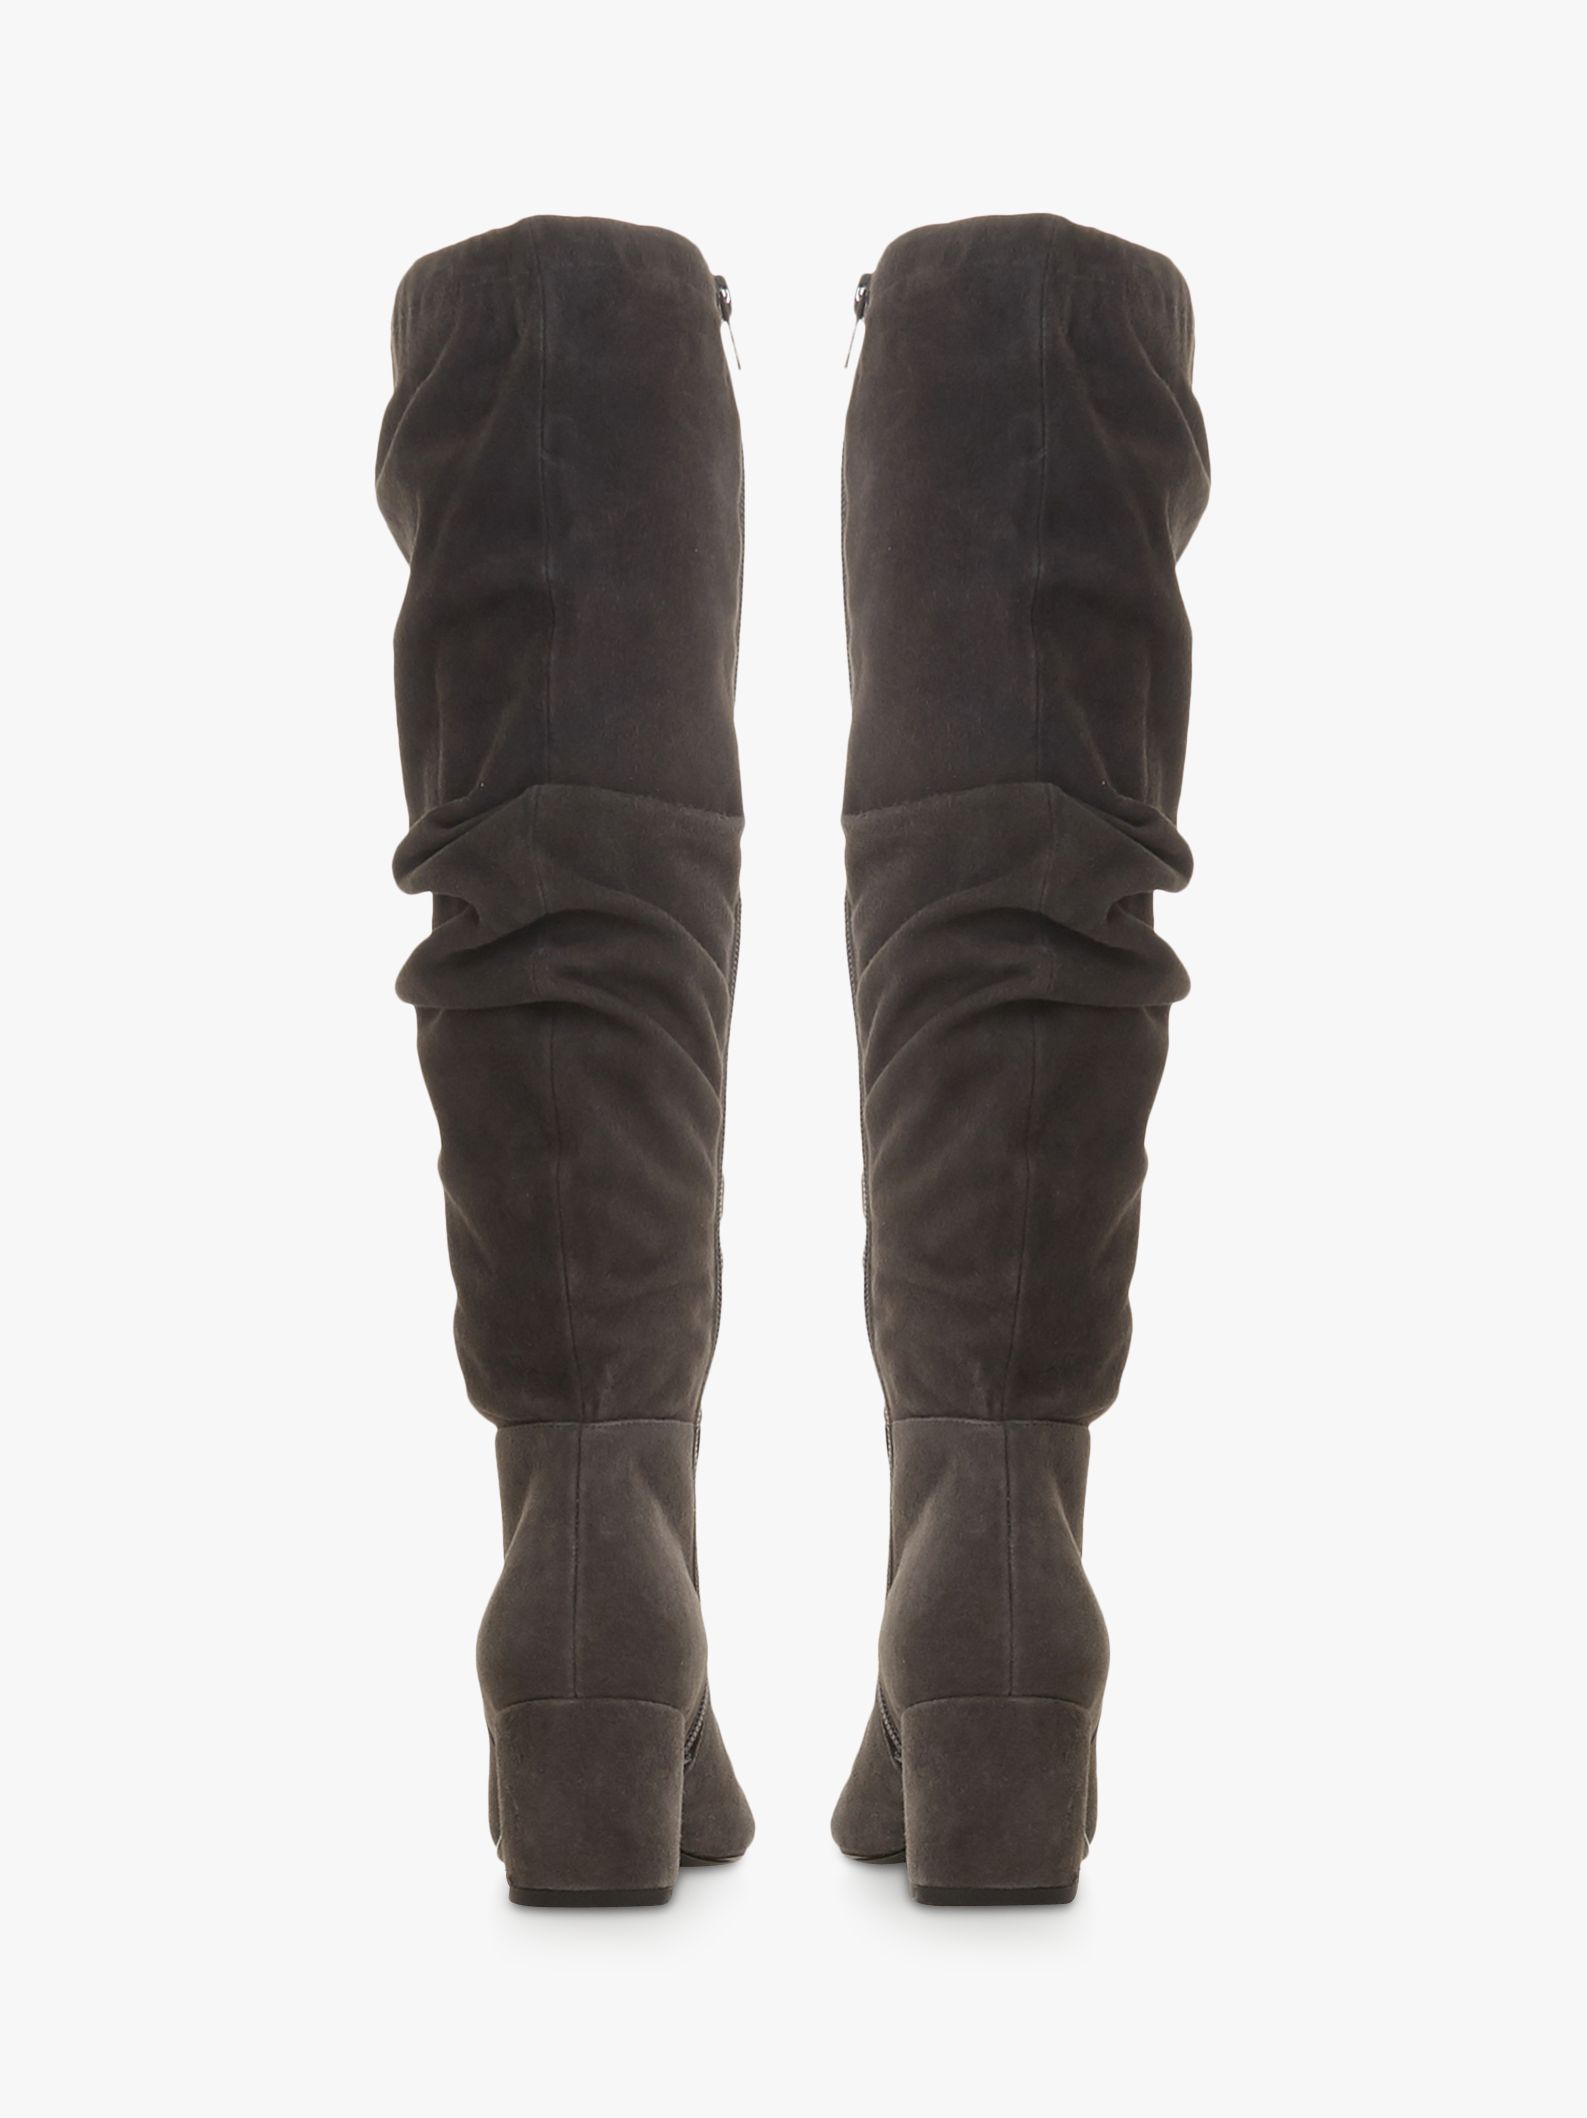 Dune Sarento Ruched Knee High Boots, Grey Suede at John Lewis & Partners